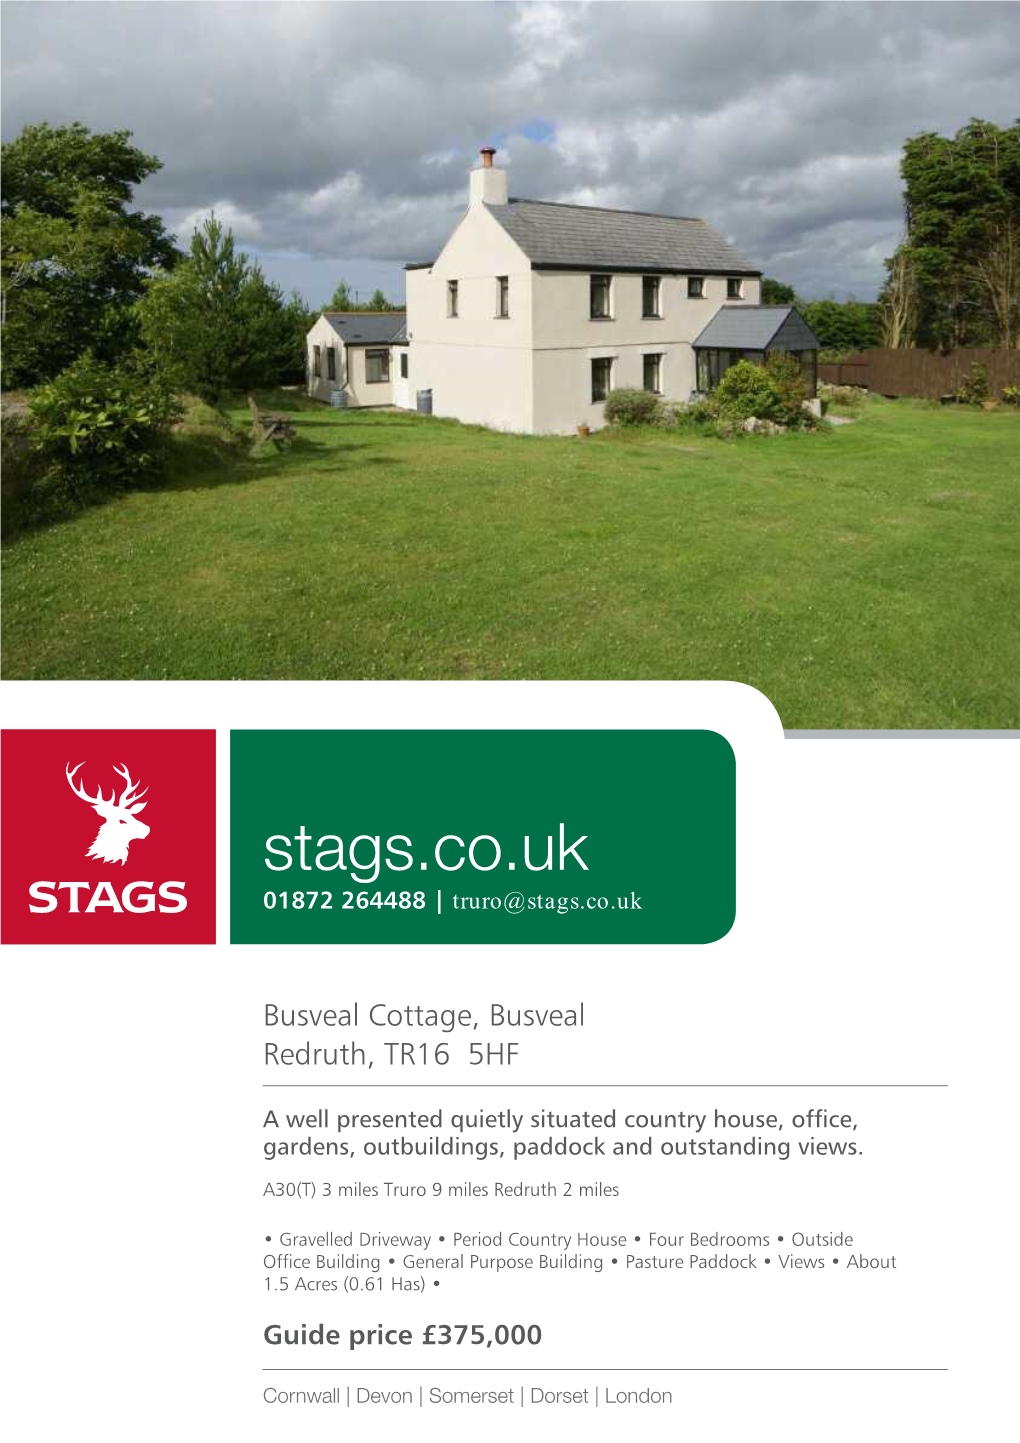 Stags.Co.Uk 01872 264488 | Truro@Stags.Co.Uk